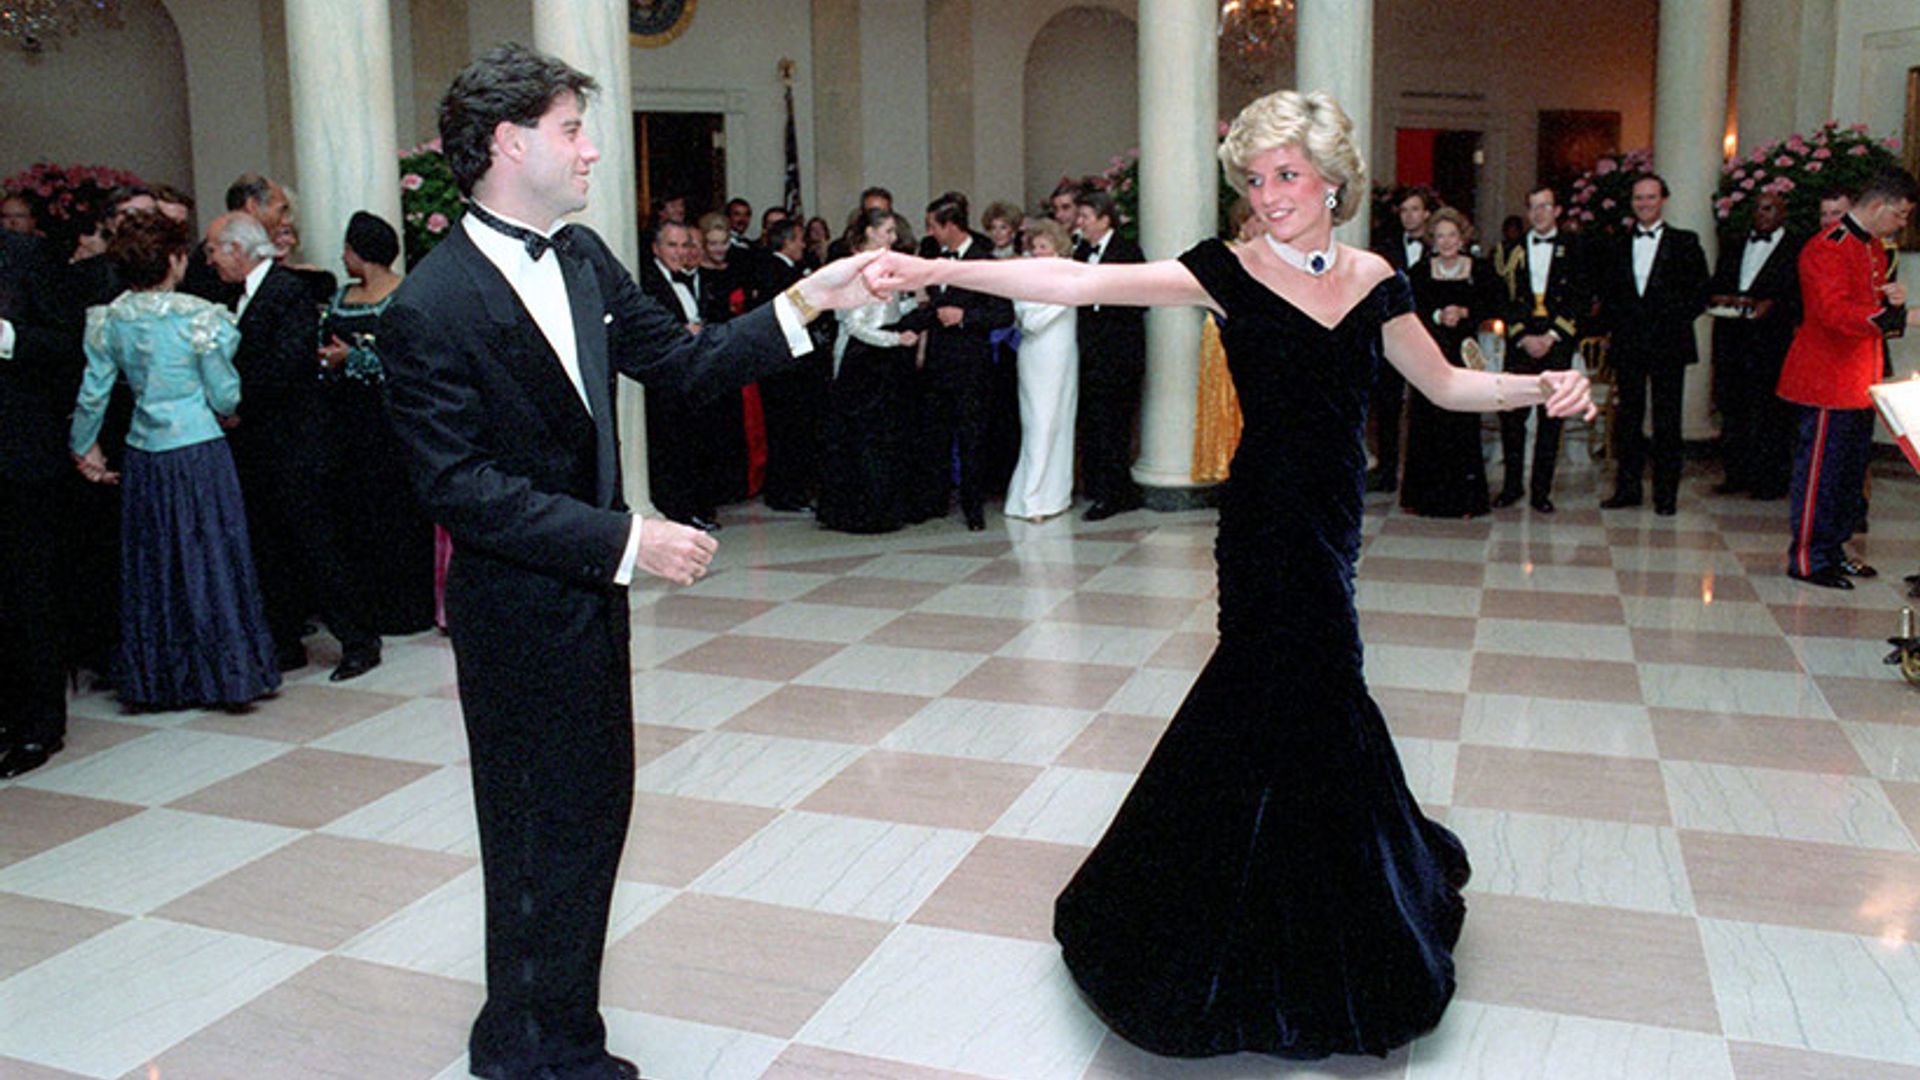 Find out who Princess Diana really wanted to dance with instead of John Travolta